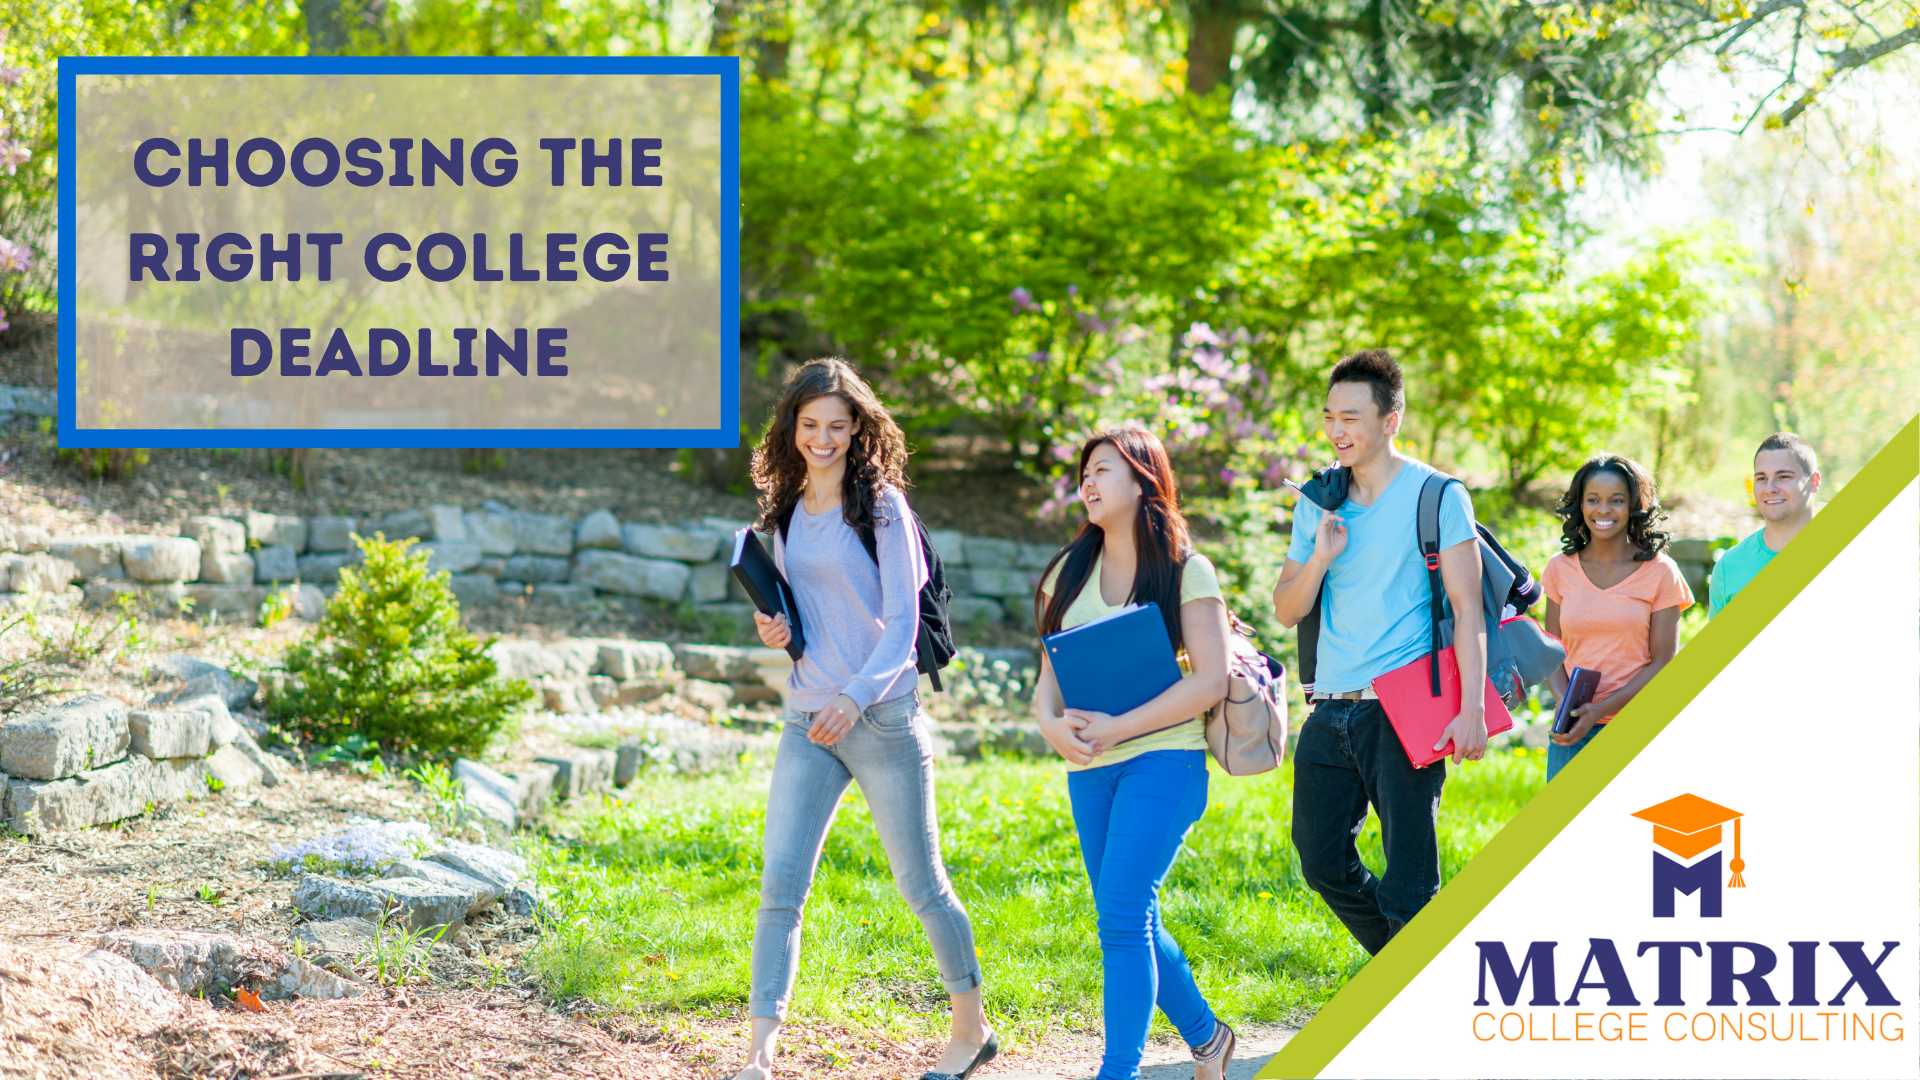 This blog is to help high school seniors learn about college application and admission deadline options.